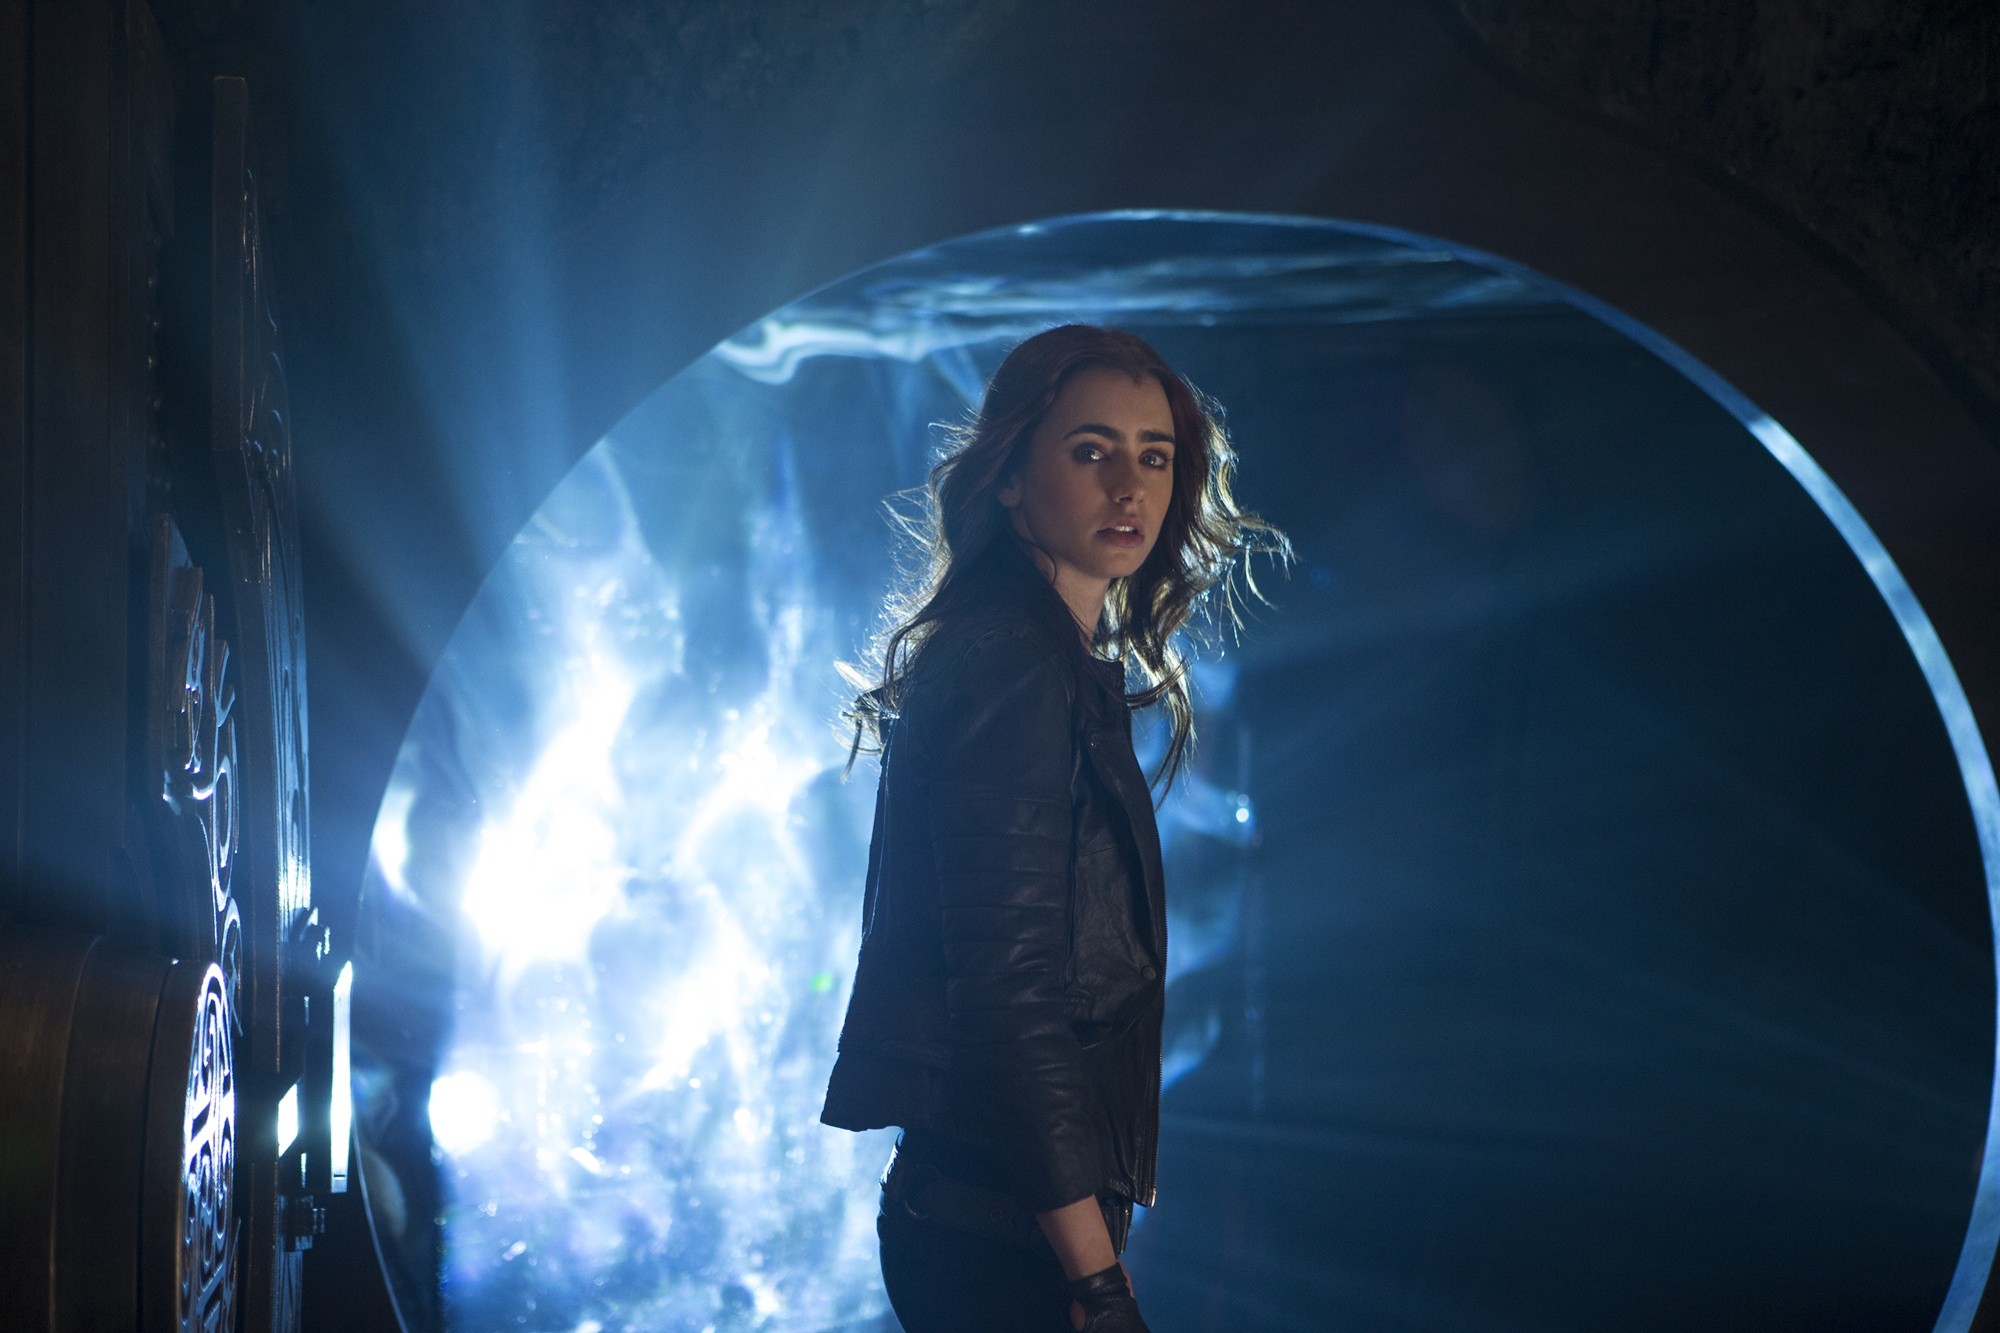 Lily Collins stars as Clary Fray in Screen Gems' The Mortal Instruments: City of Bones (2013)